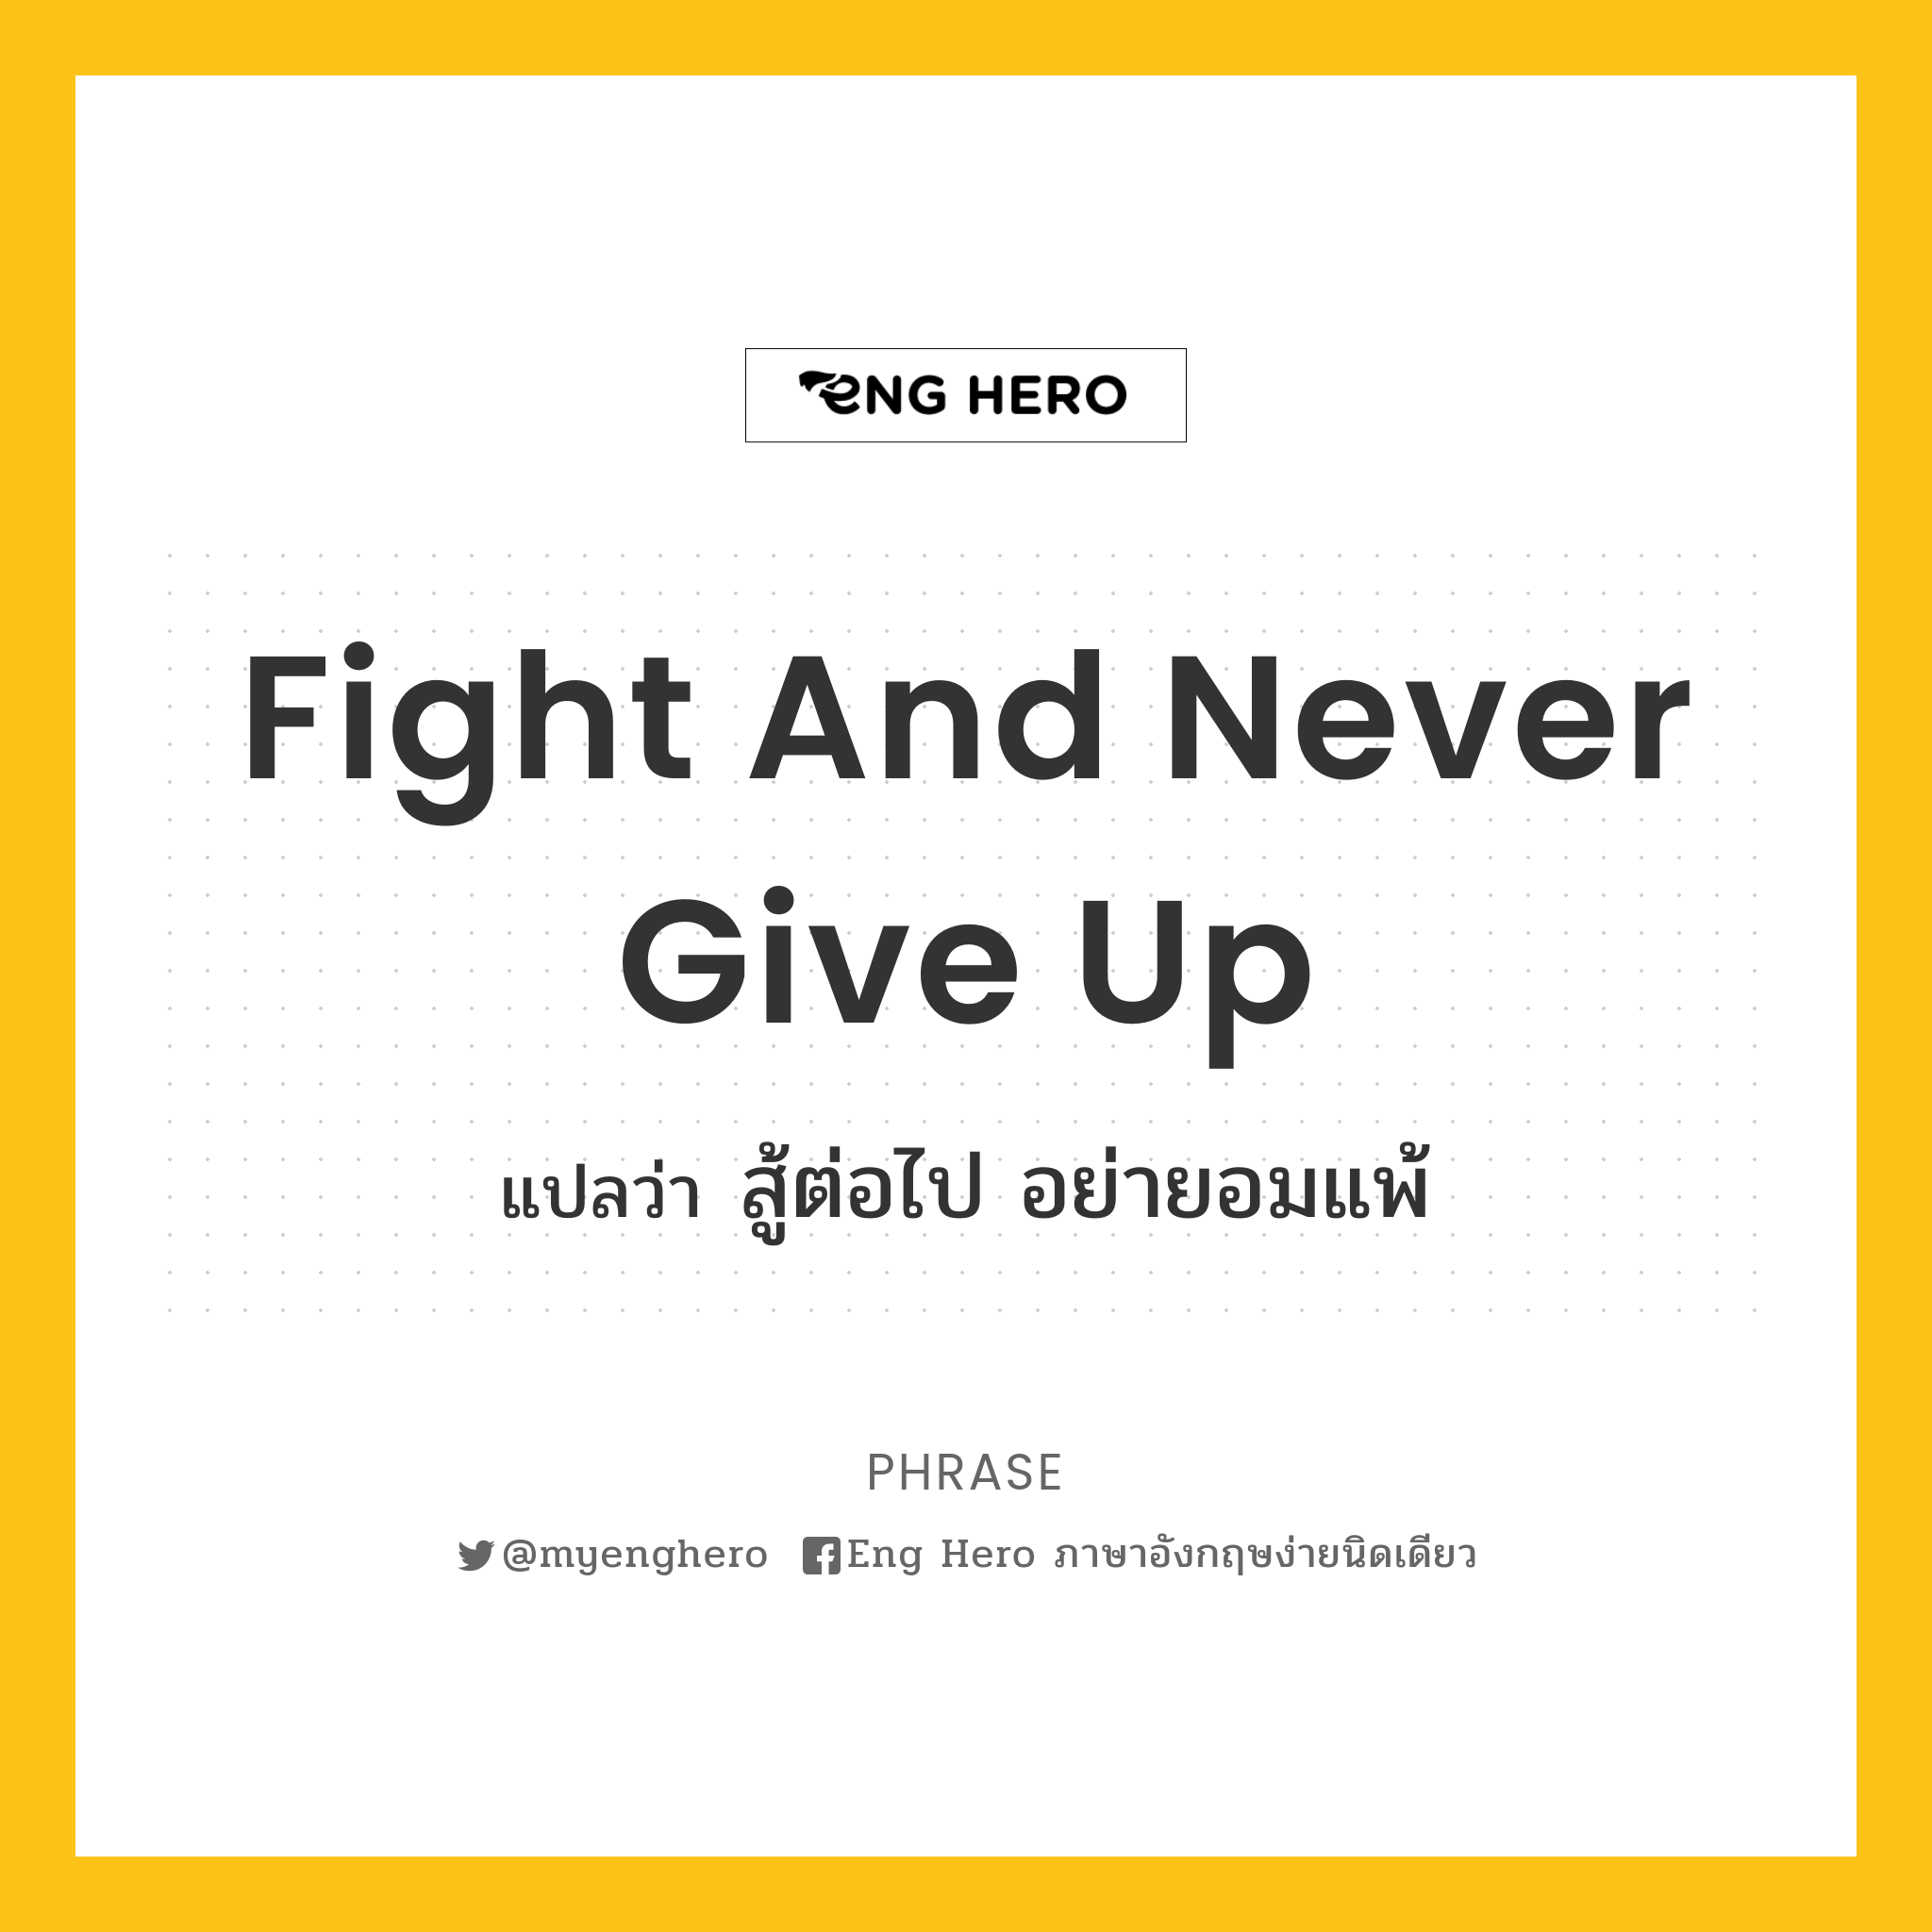 Fight and never give up